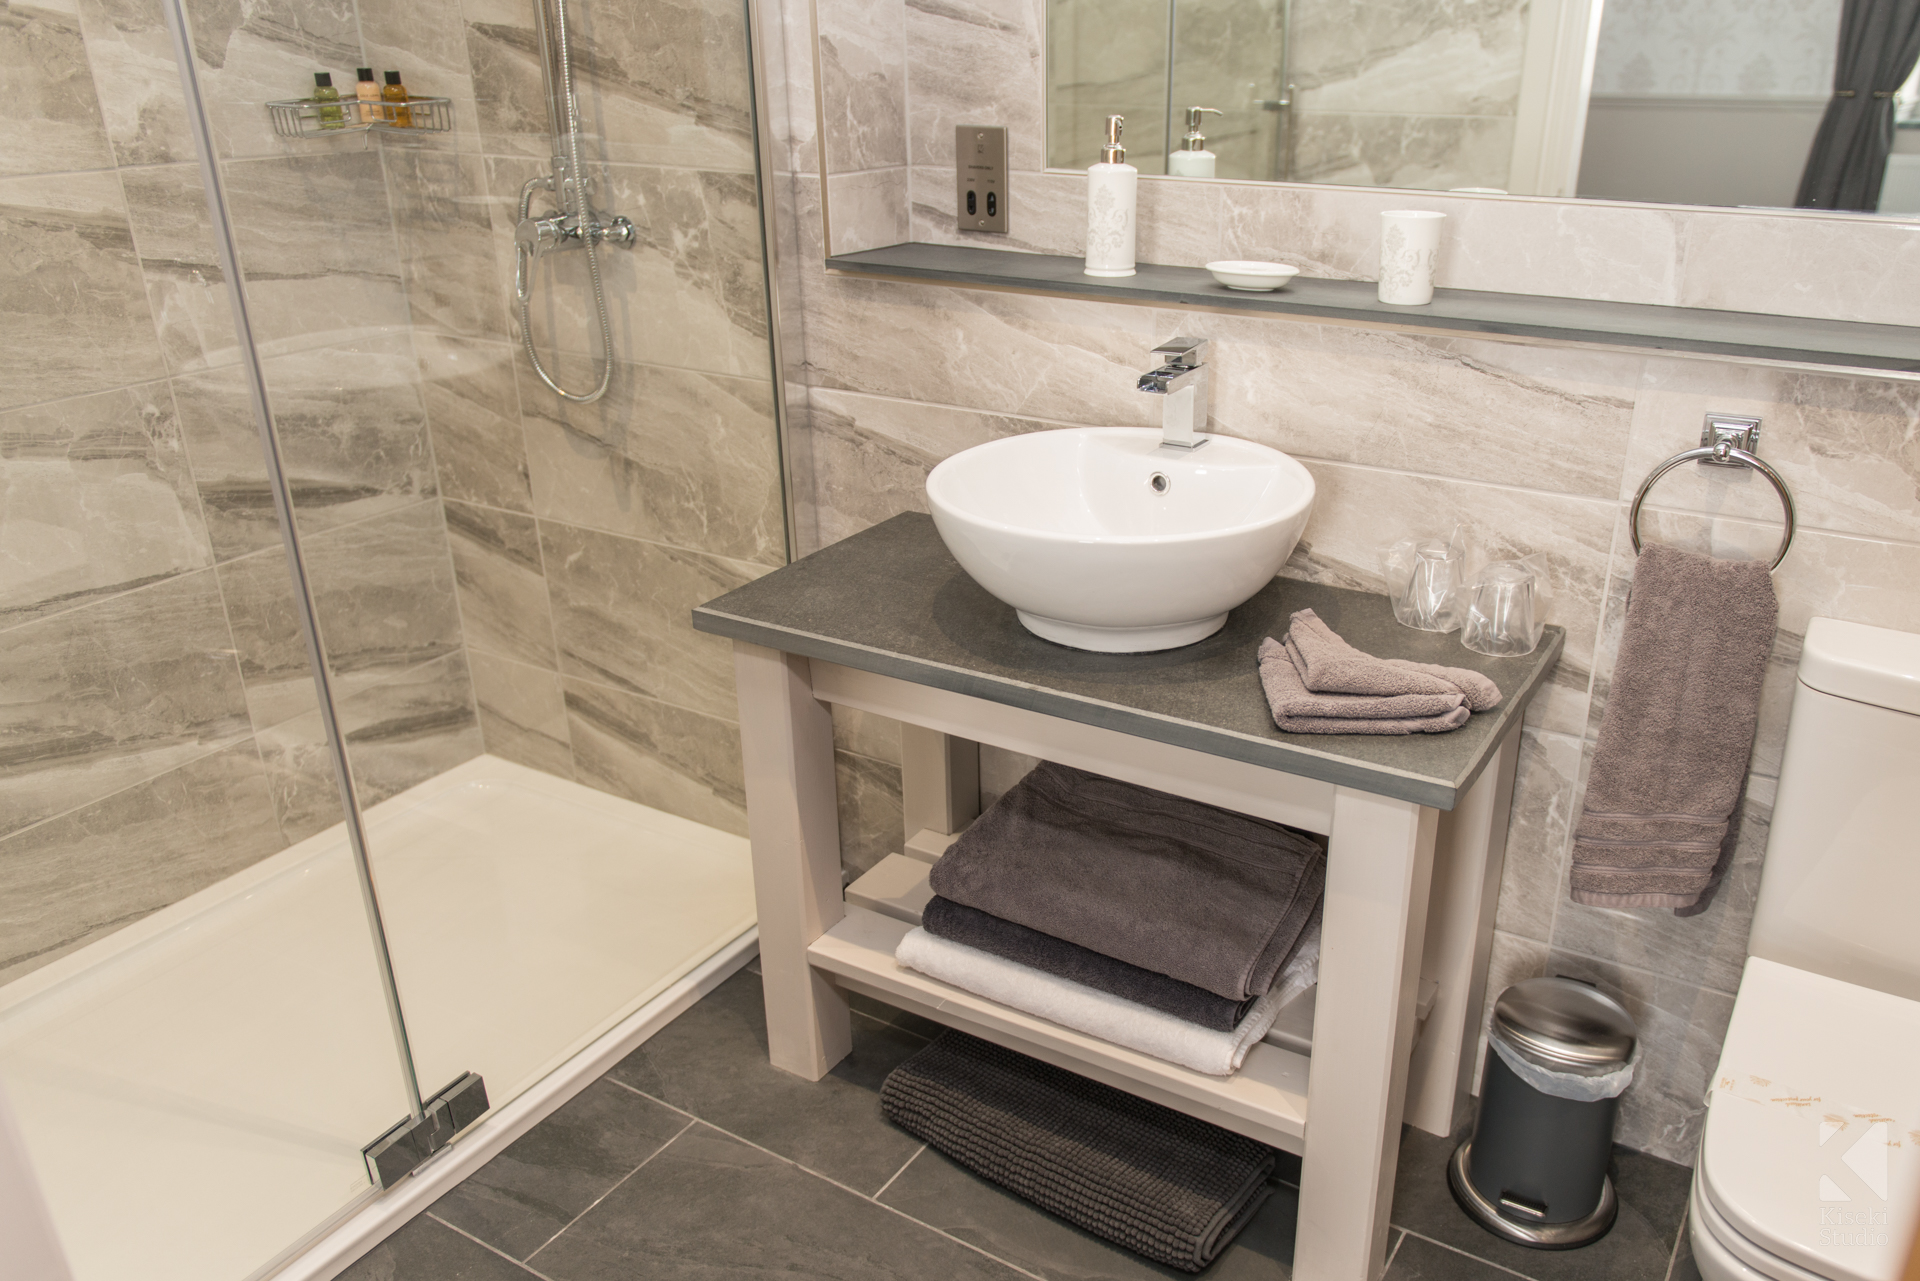 herdwicks-boutique-hotel-bathroom-modern-clean-lake-district-commercial-photography